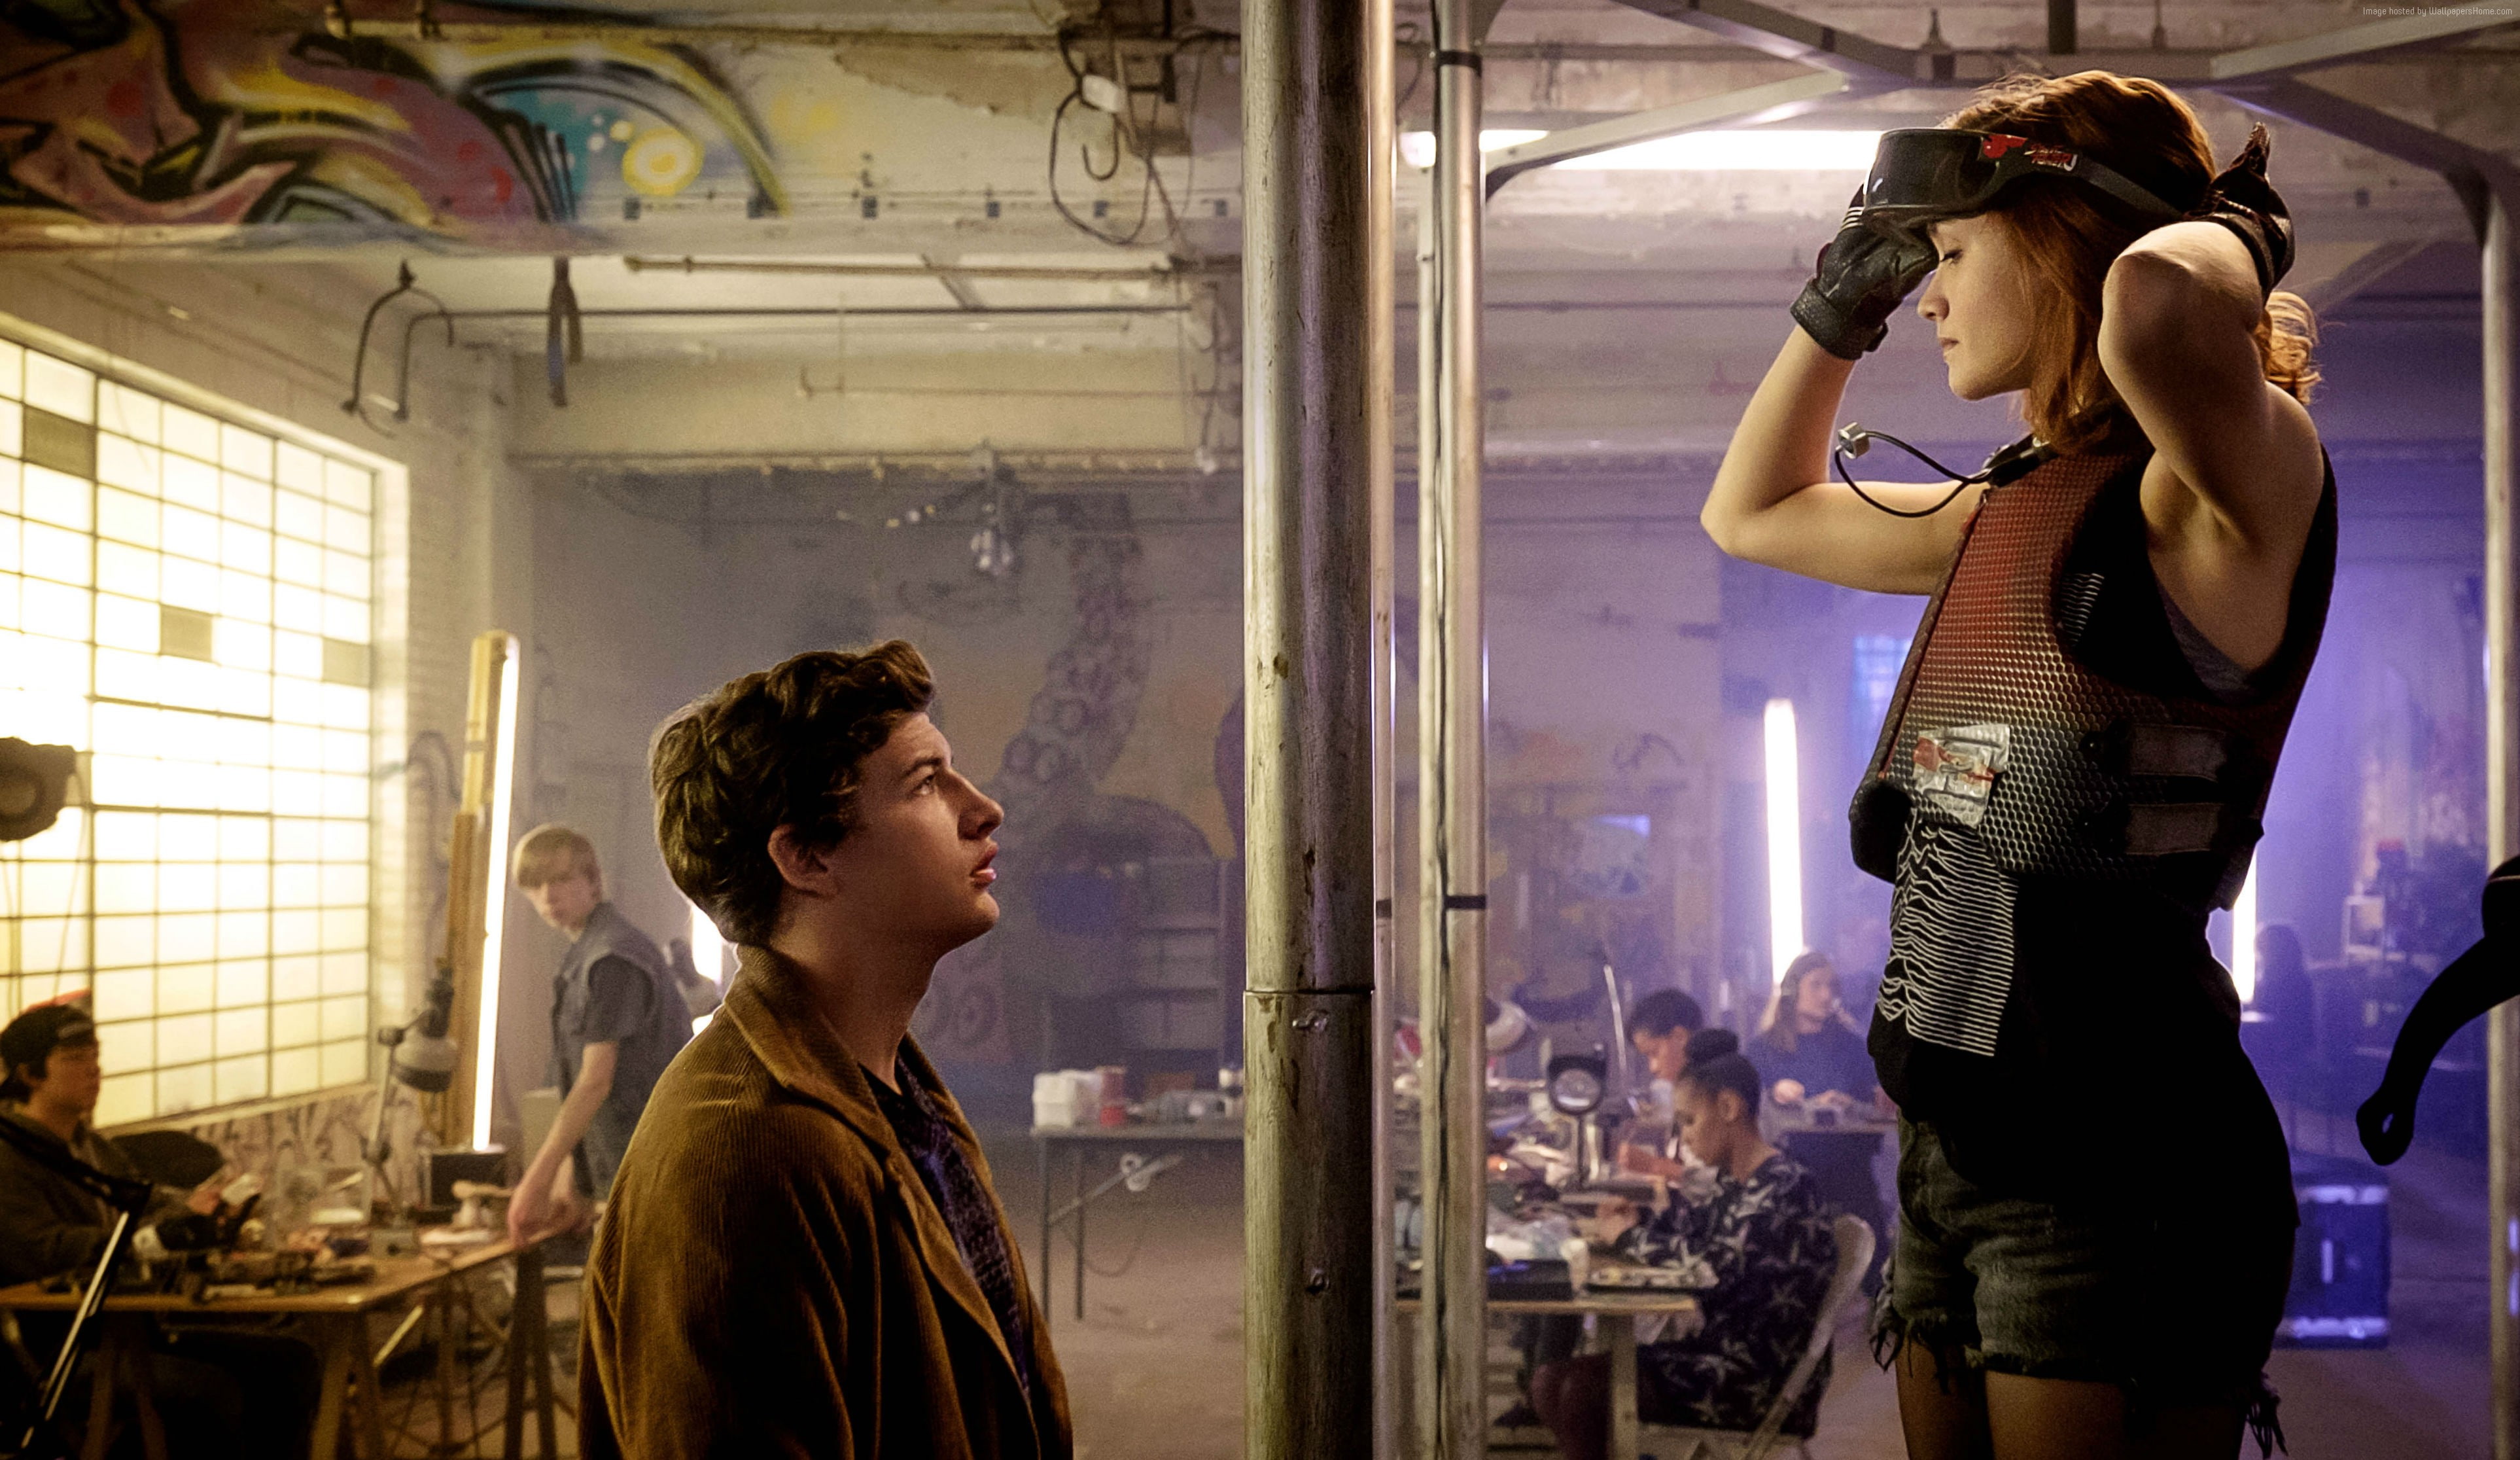 4k, VR, Ready Player One, Tye Sheridan, Olivia Cooke, young adult